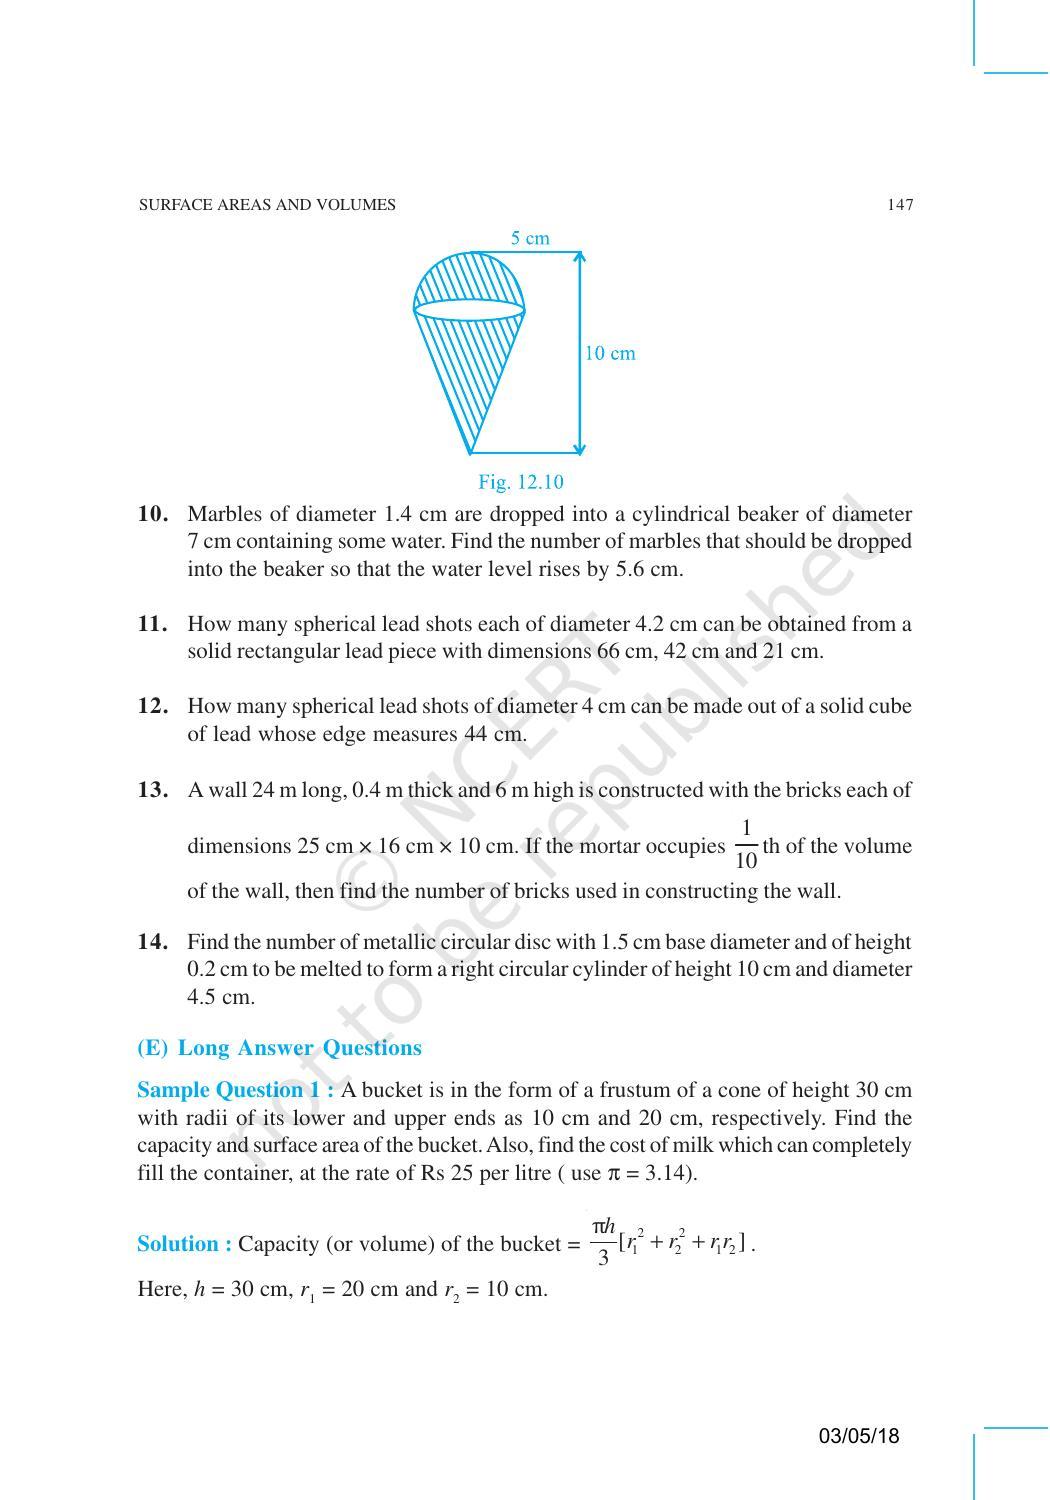 NCERT Exemplar Book for Class 10 Maths: Chapter 12 Surface areas and Volumes - Page 12